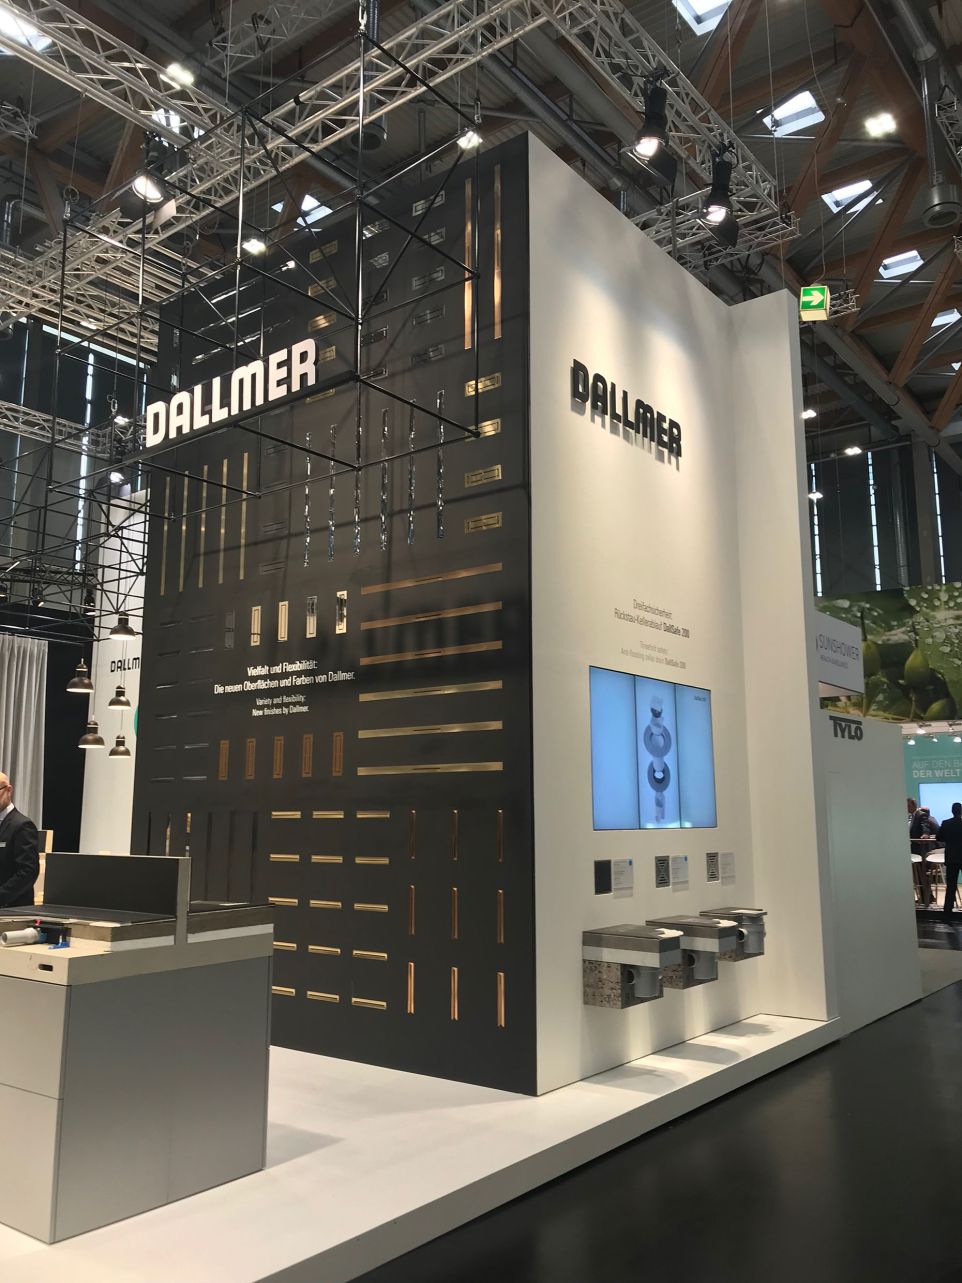 The Dallmer exhibition stand covered some 100 m2